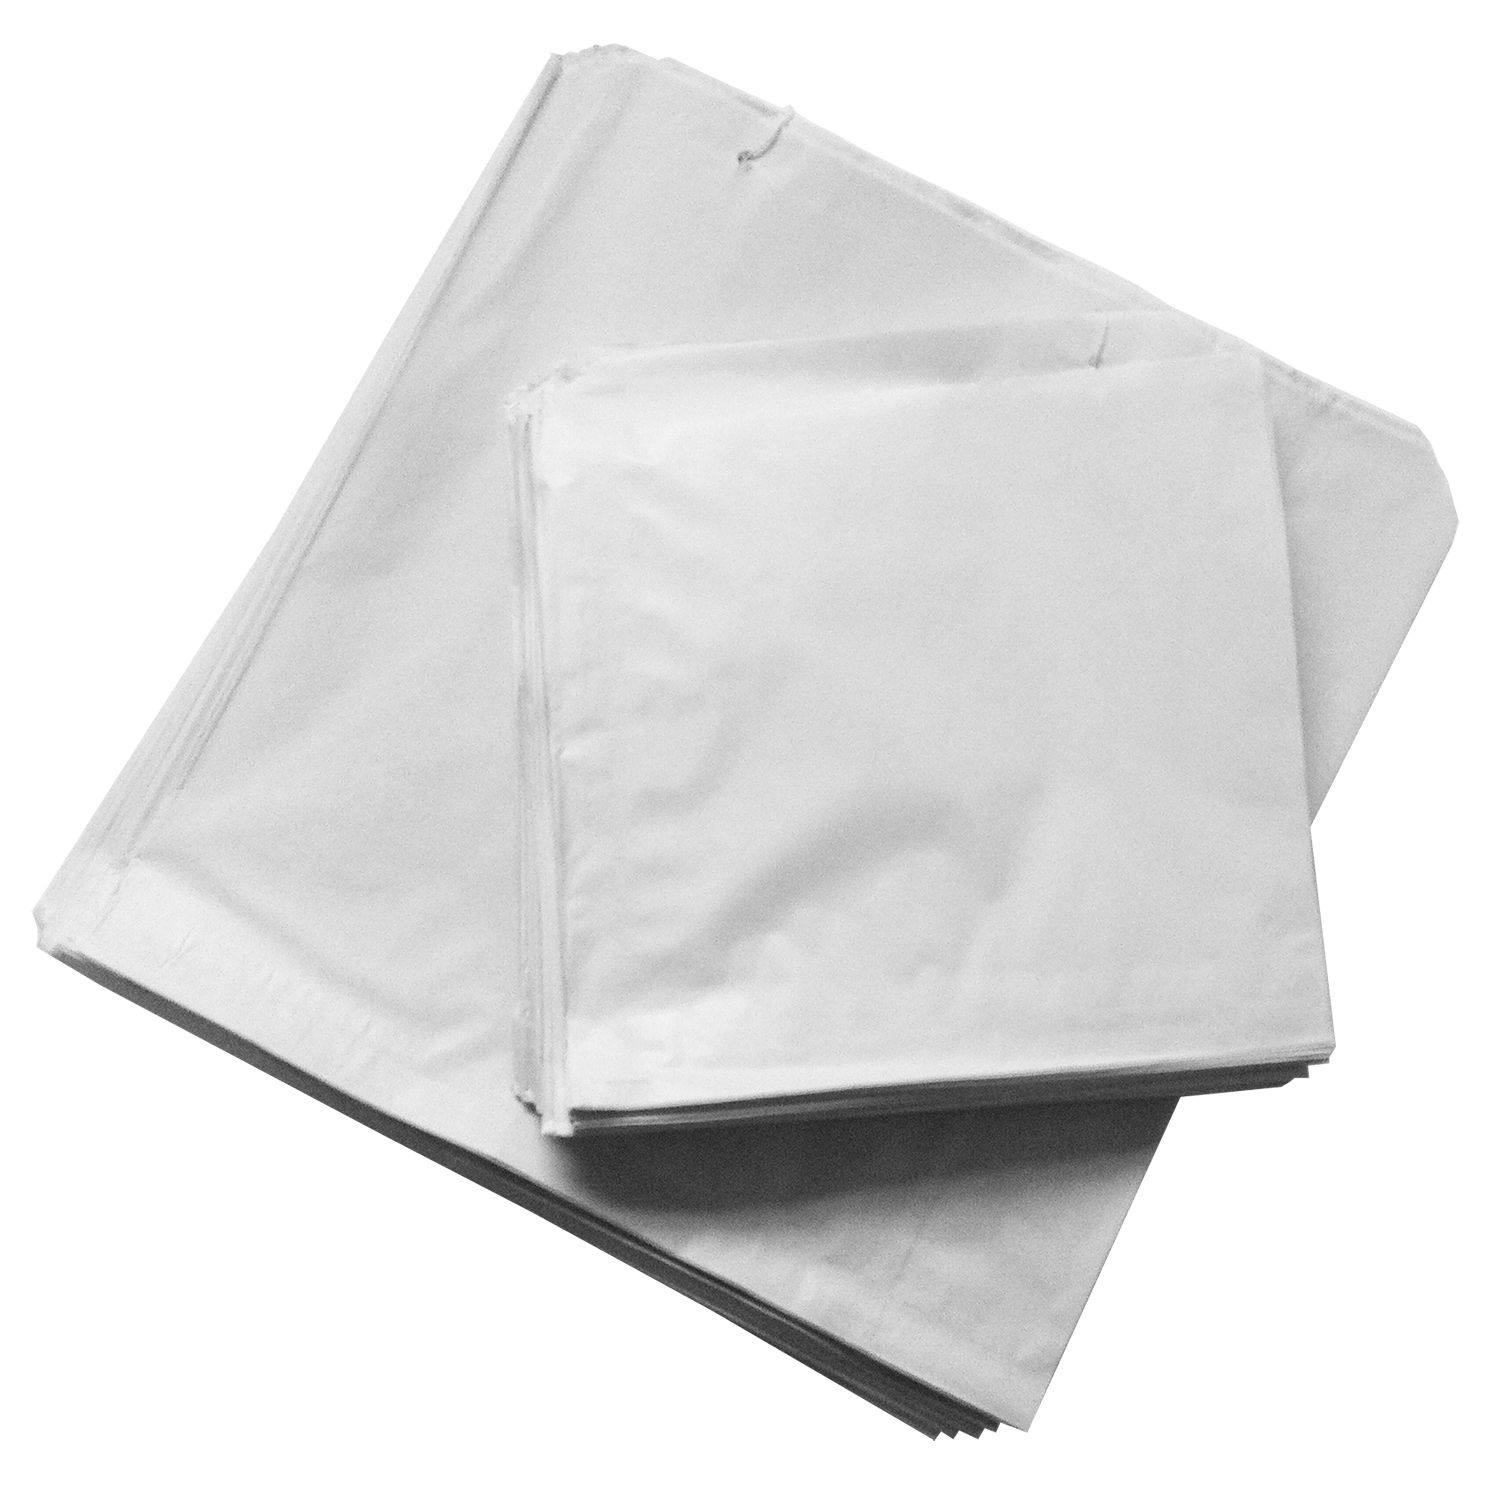 WHITE STRUNG PAPER BAGS